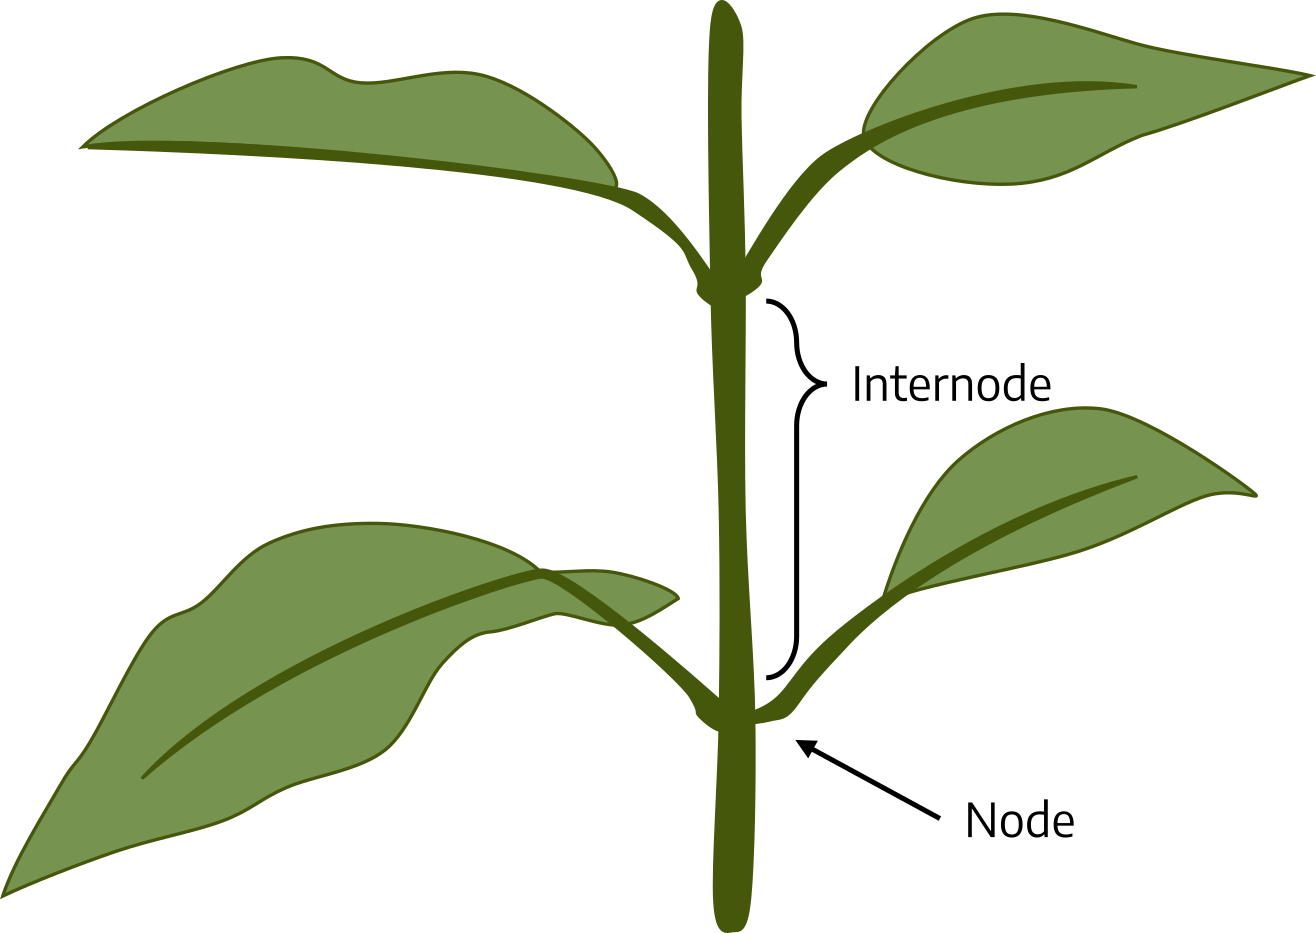 Smooth stem with intermittent raised areas, leaf attached to each raised section. Raised areas are nodes, and smooth areas between nodes are internodes.